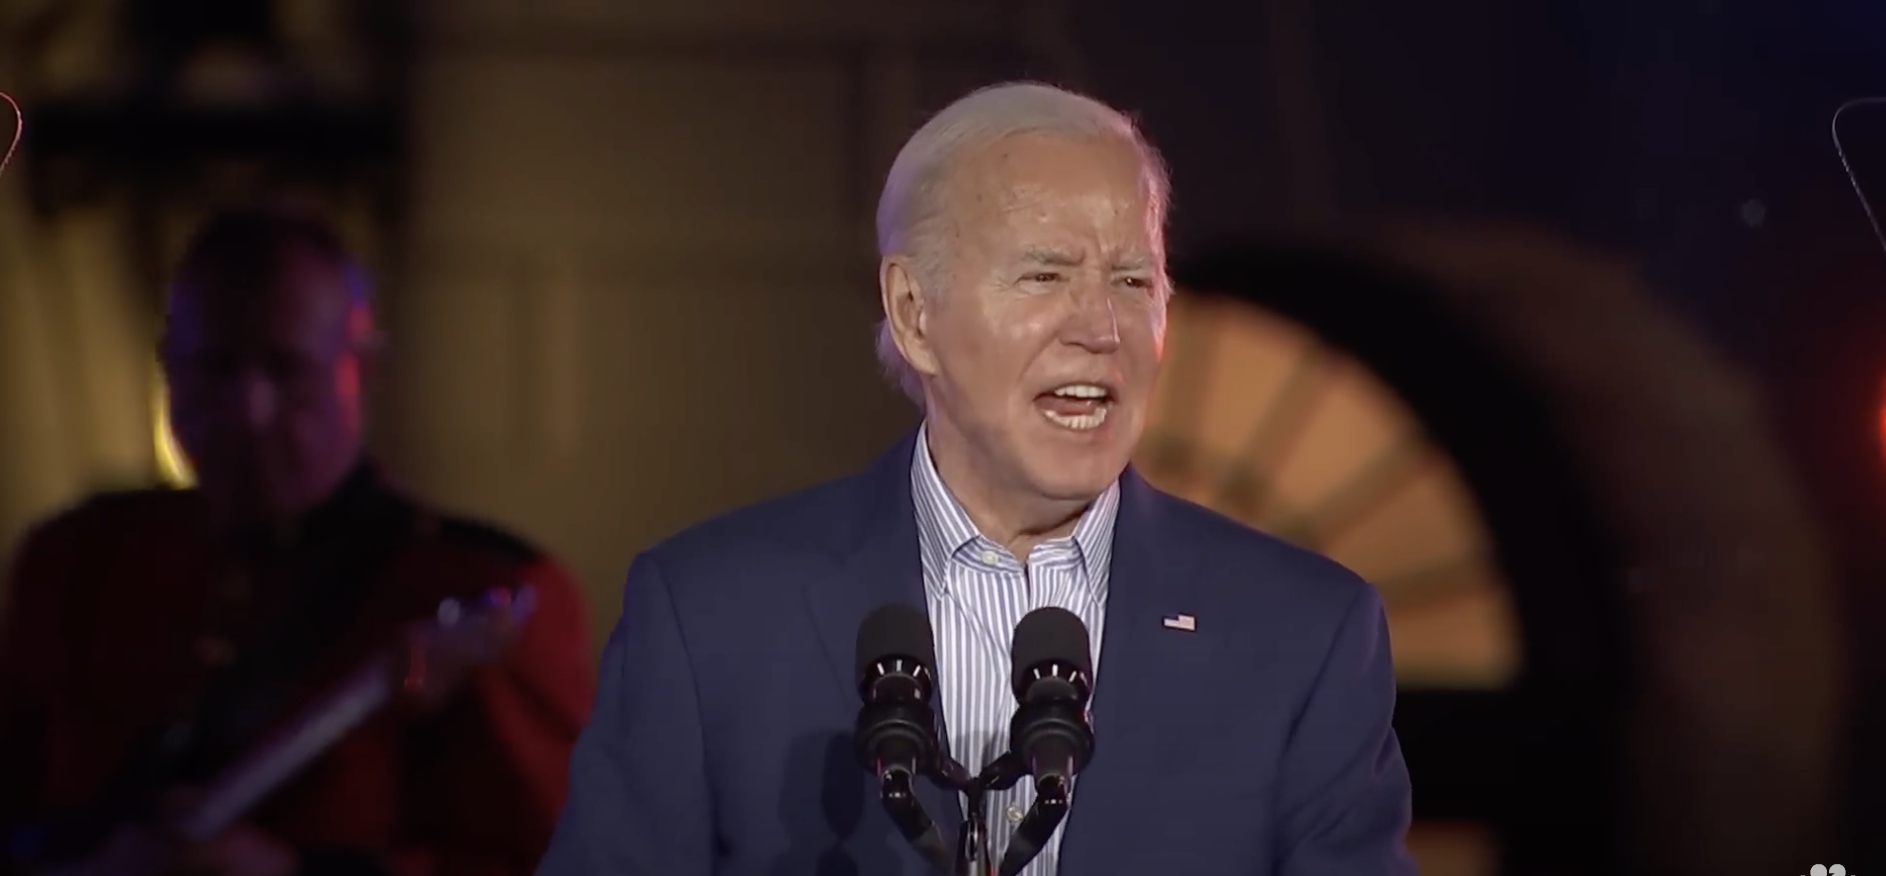 Biden Risks Alienating Family by Labeling Someone a ‘Convicted Felon